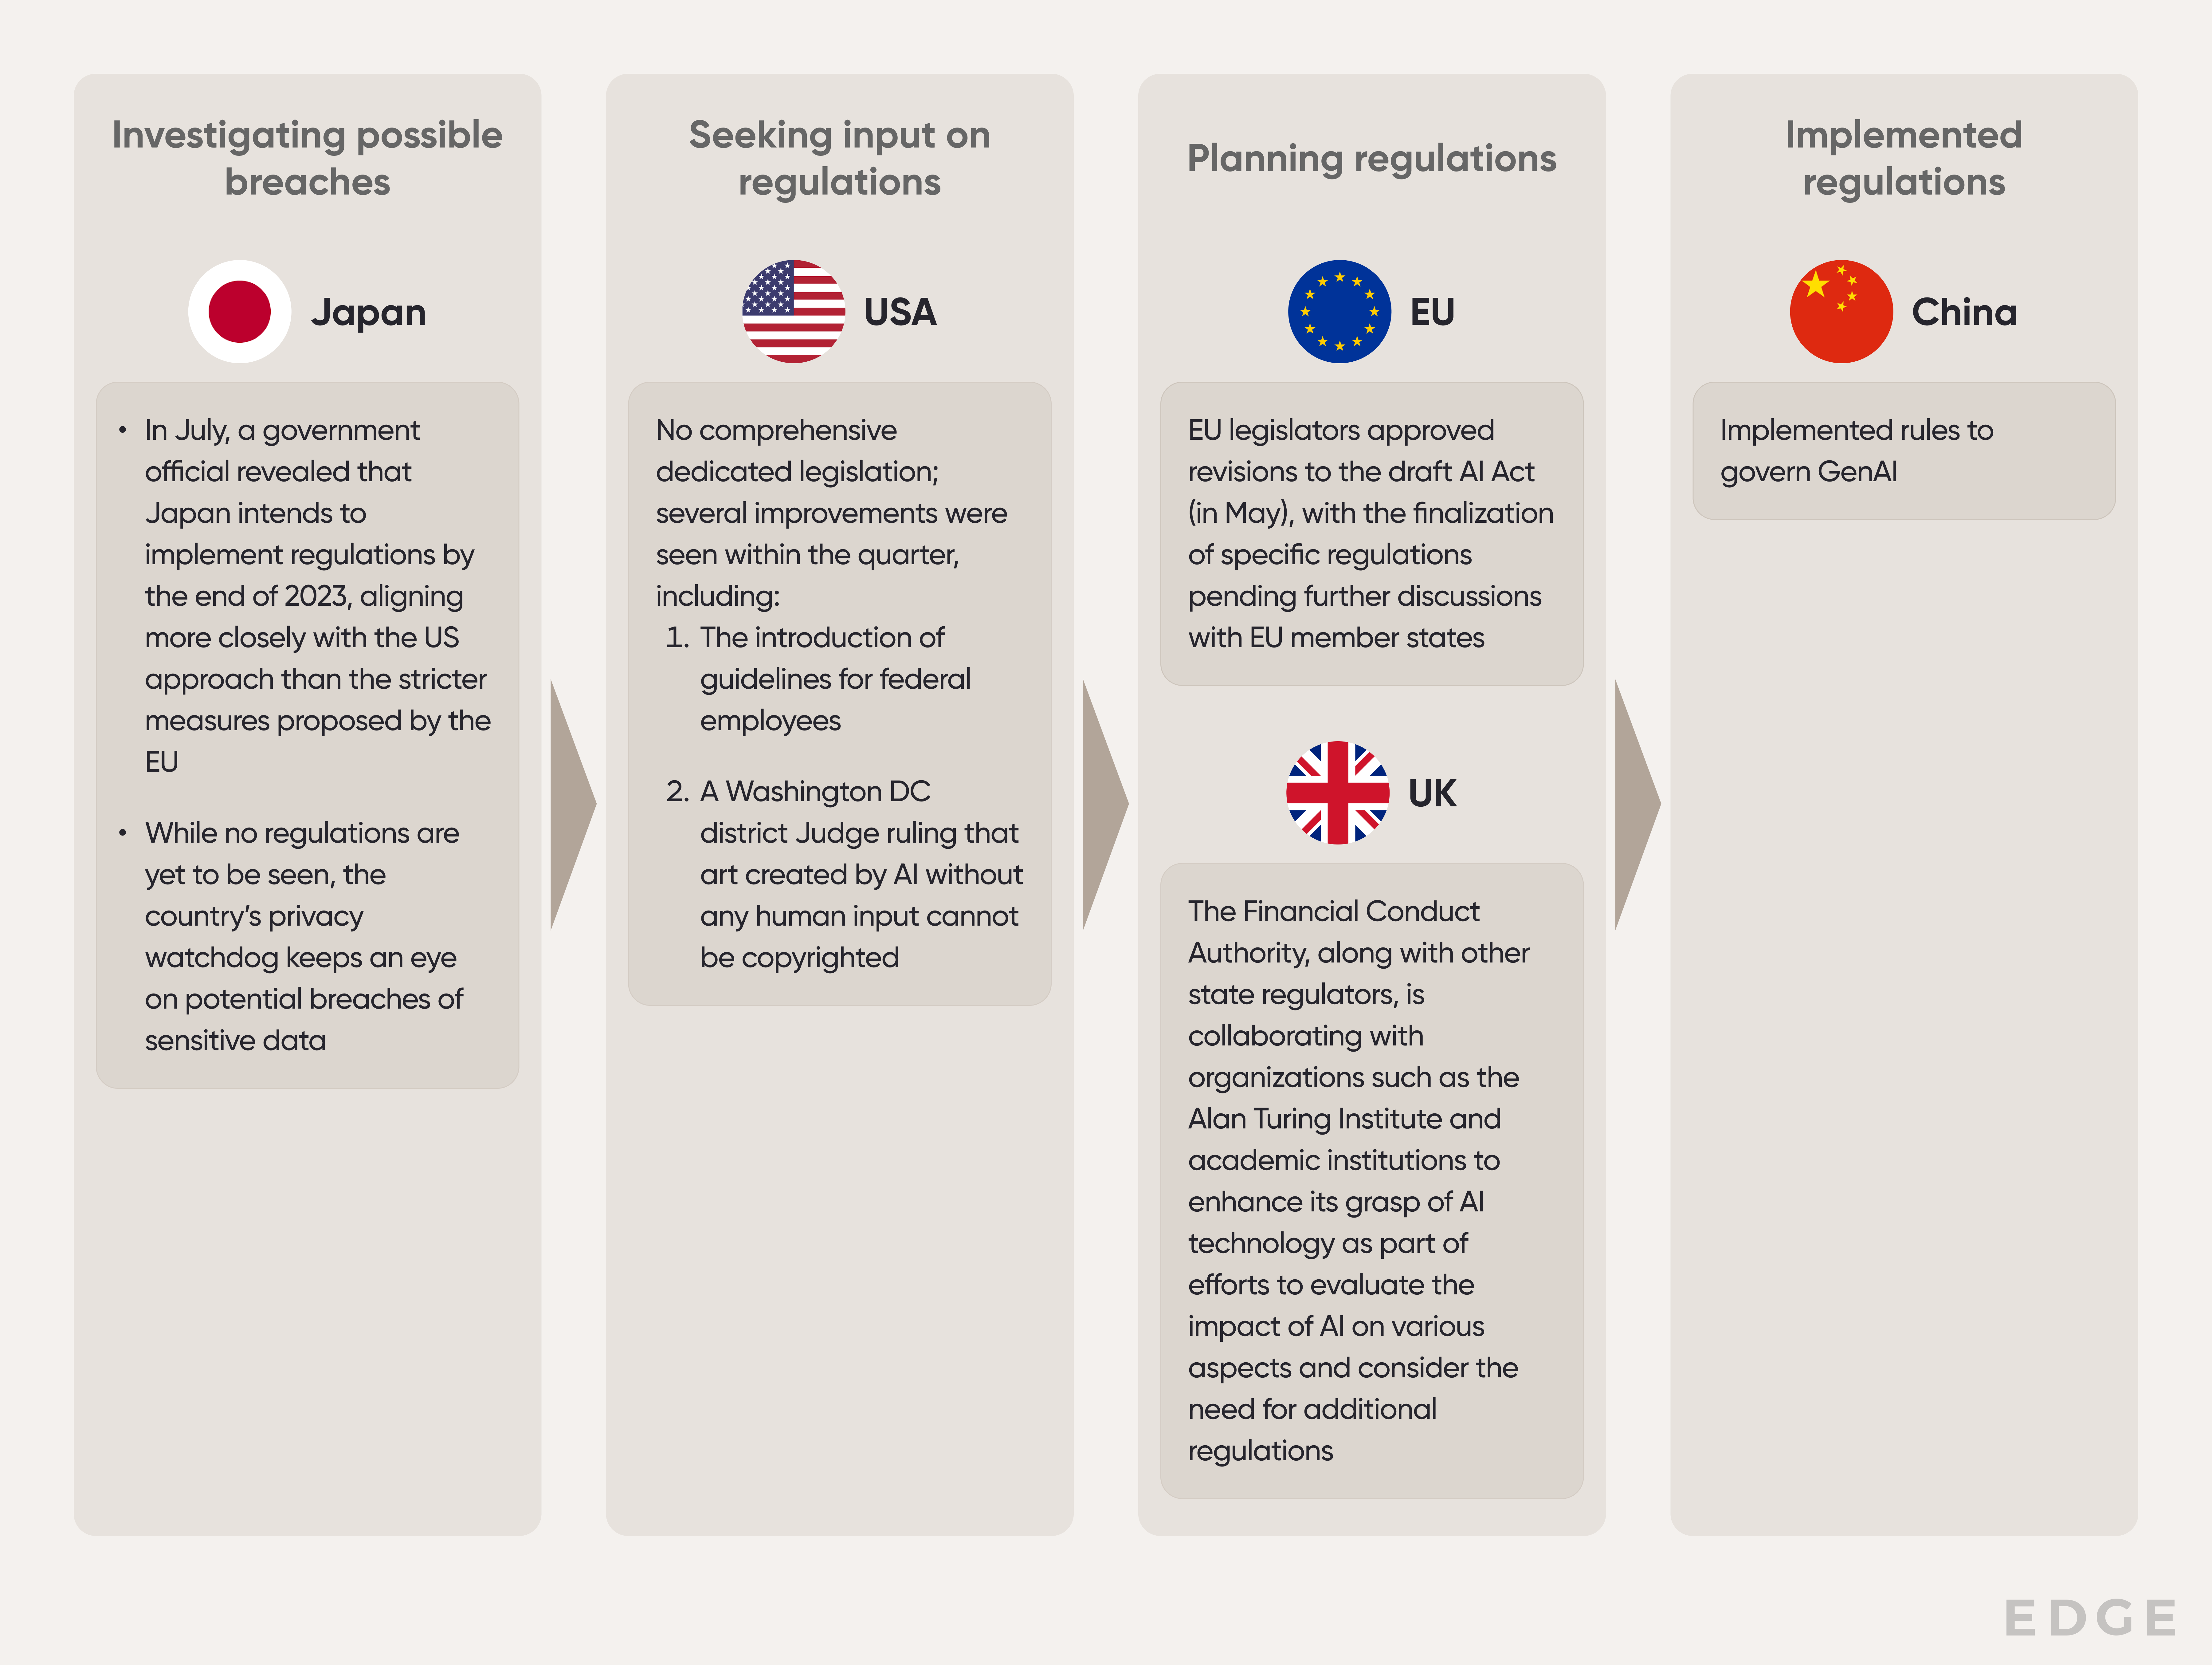 Stages of regulations in major countries/jurisdictions as of Q3 2023